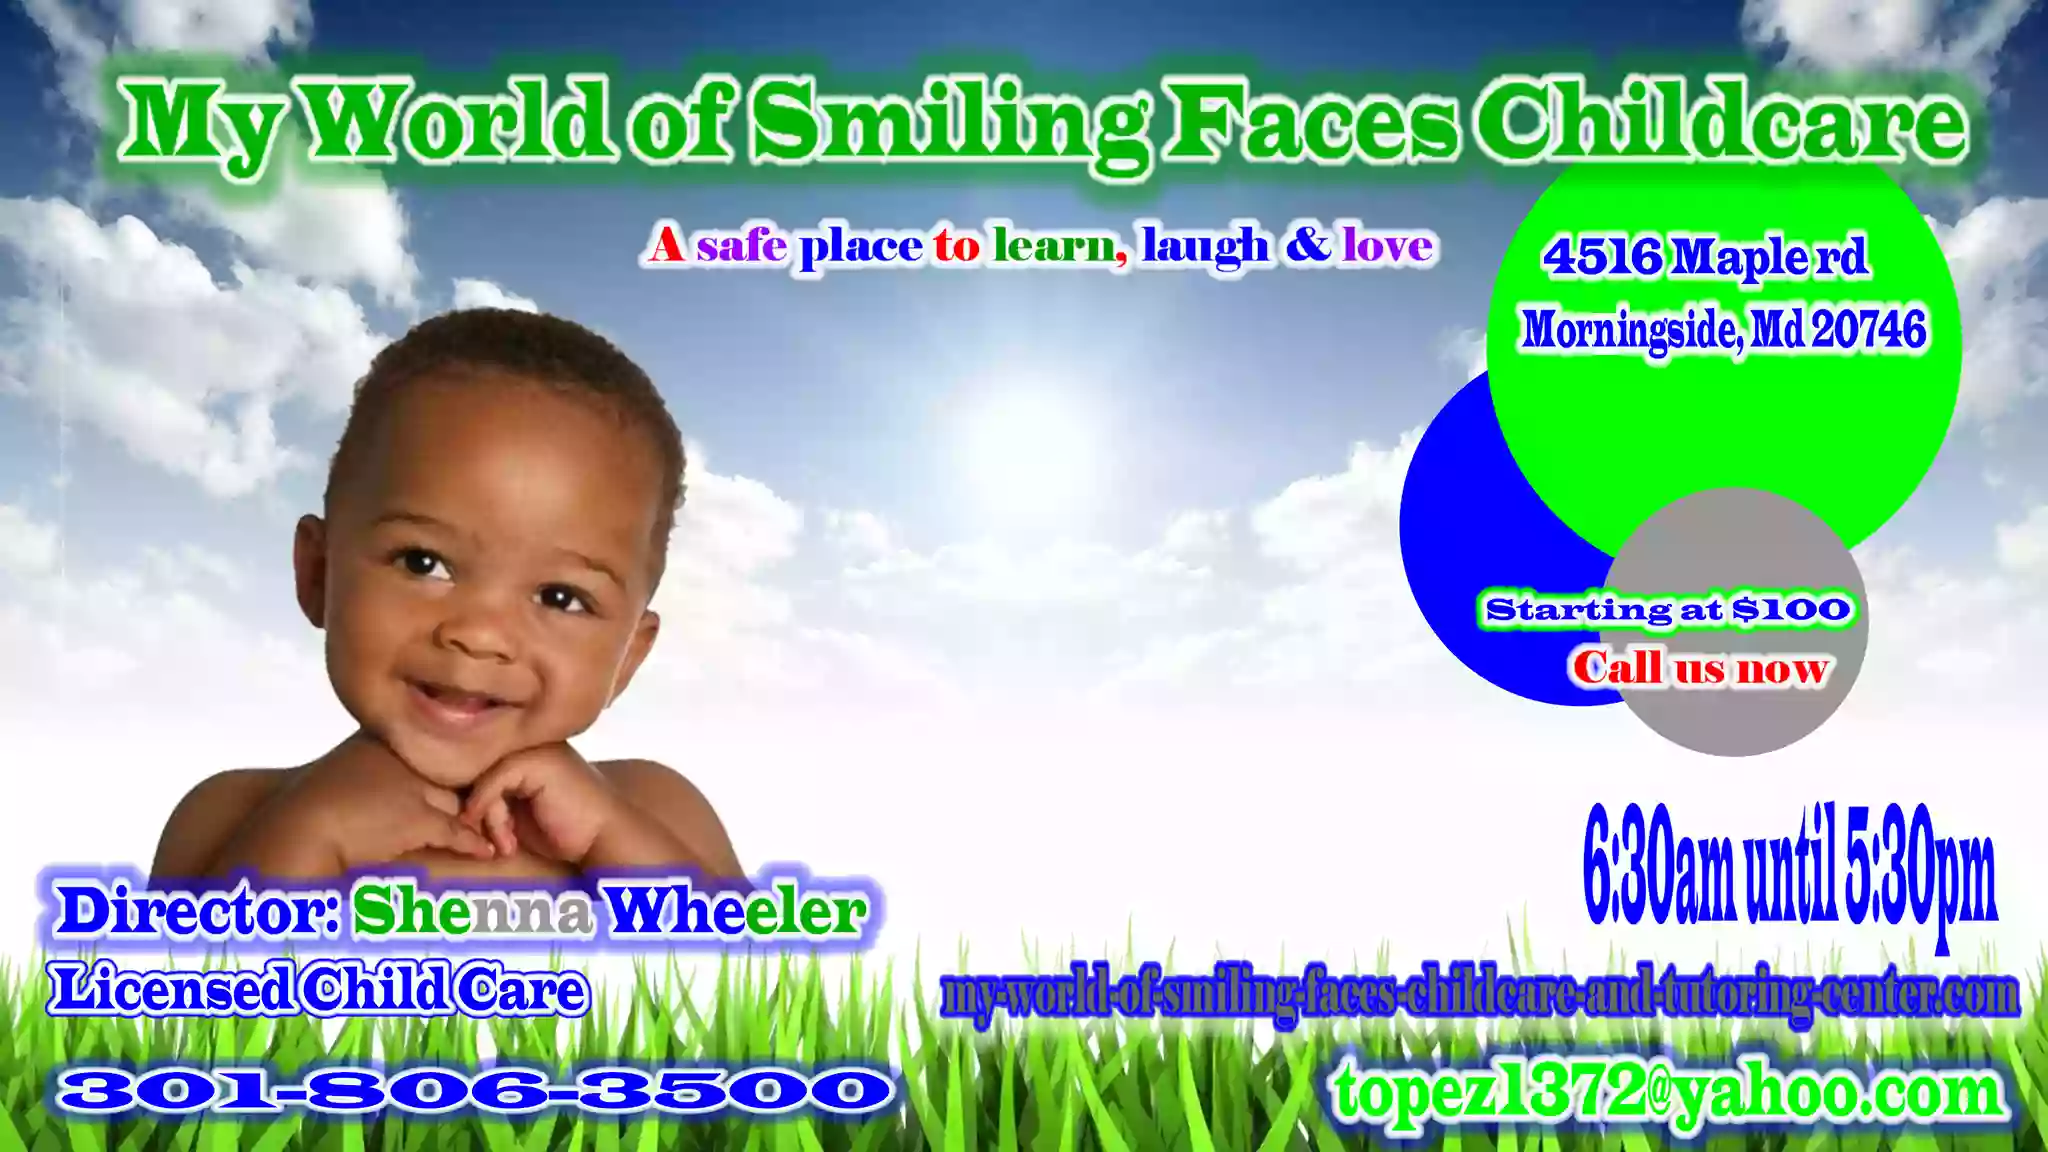 My World of Smiling Faces Childcare and Tutoring Center